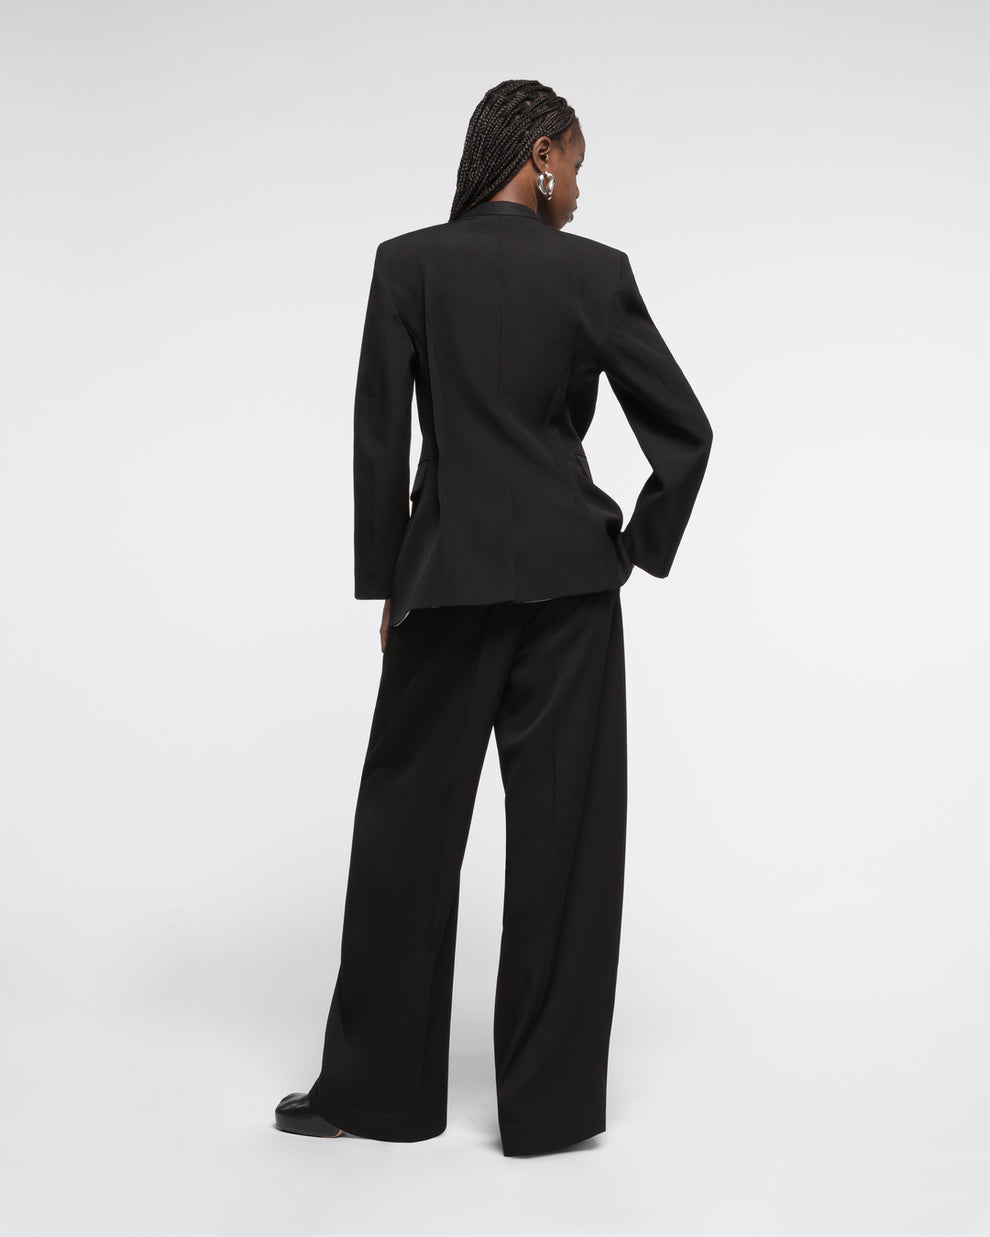 WIDE LEG SUITING TROUSER PANTS in Black